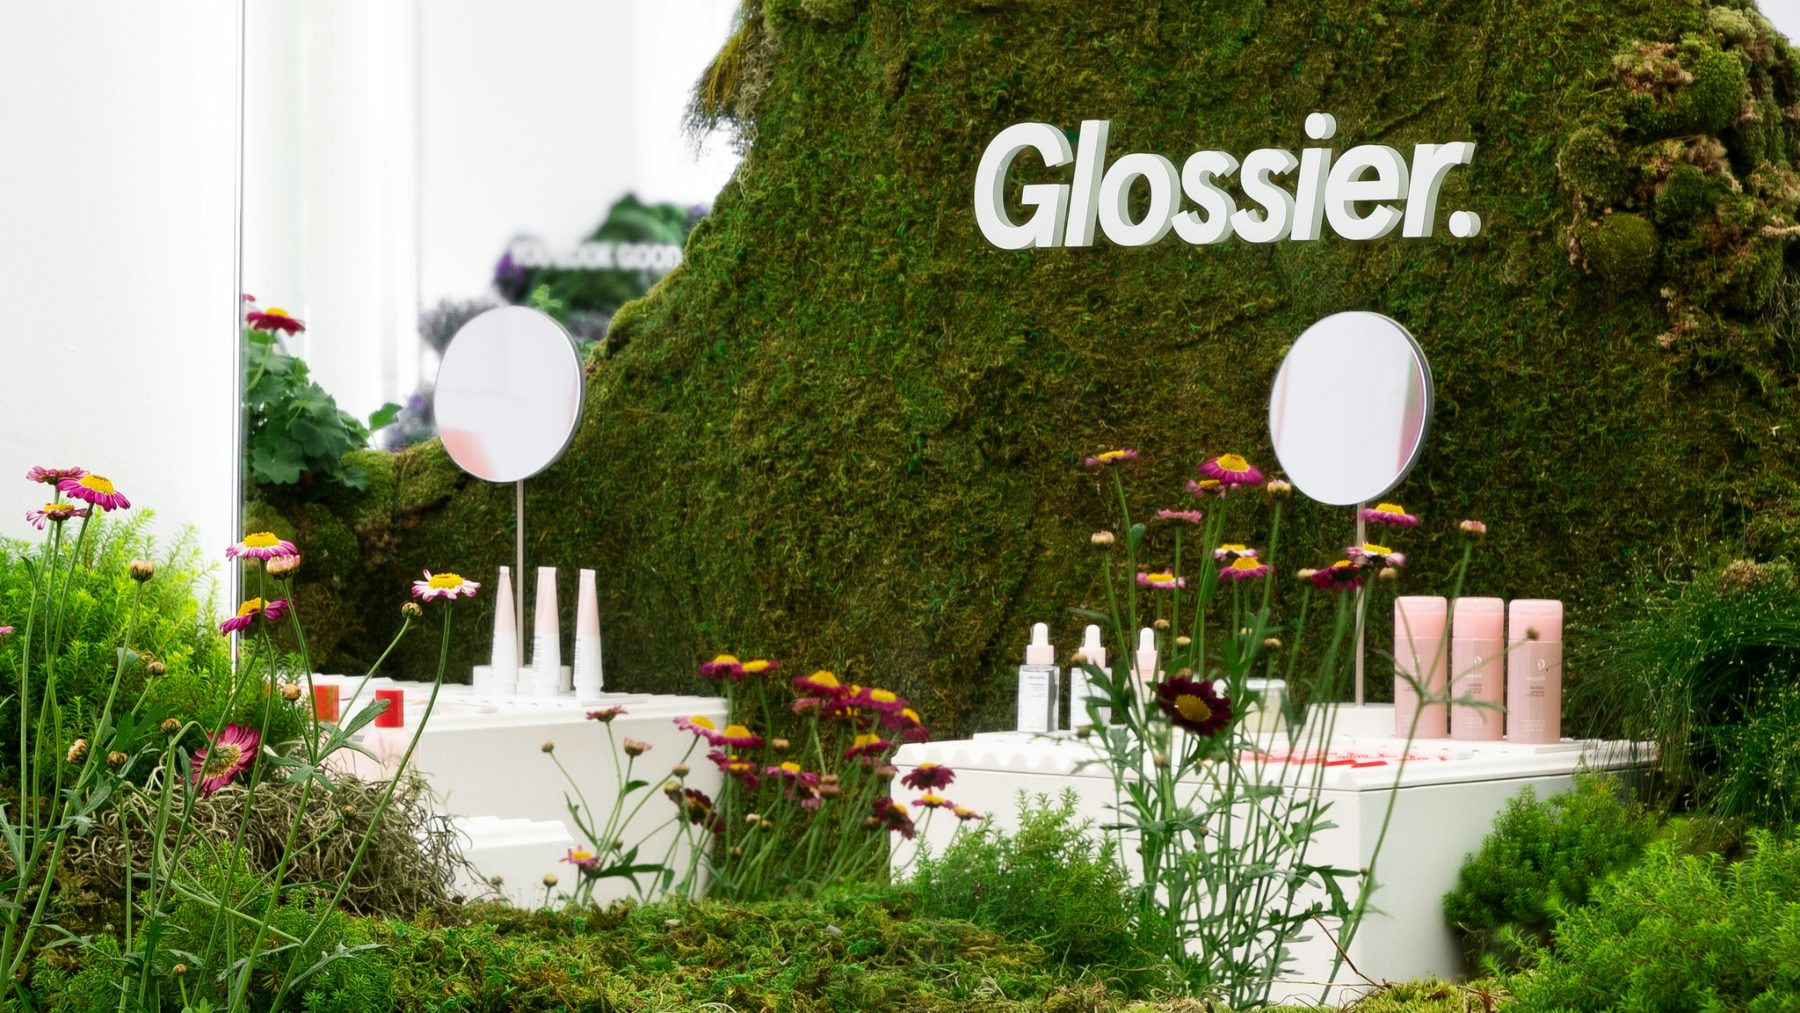 Glossier names new chief financial officer and chief commercial officer. Glossier.